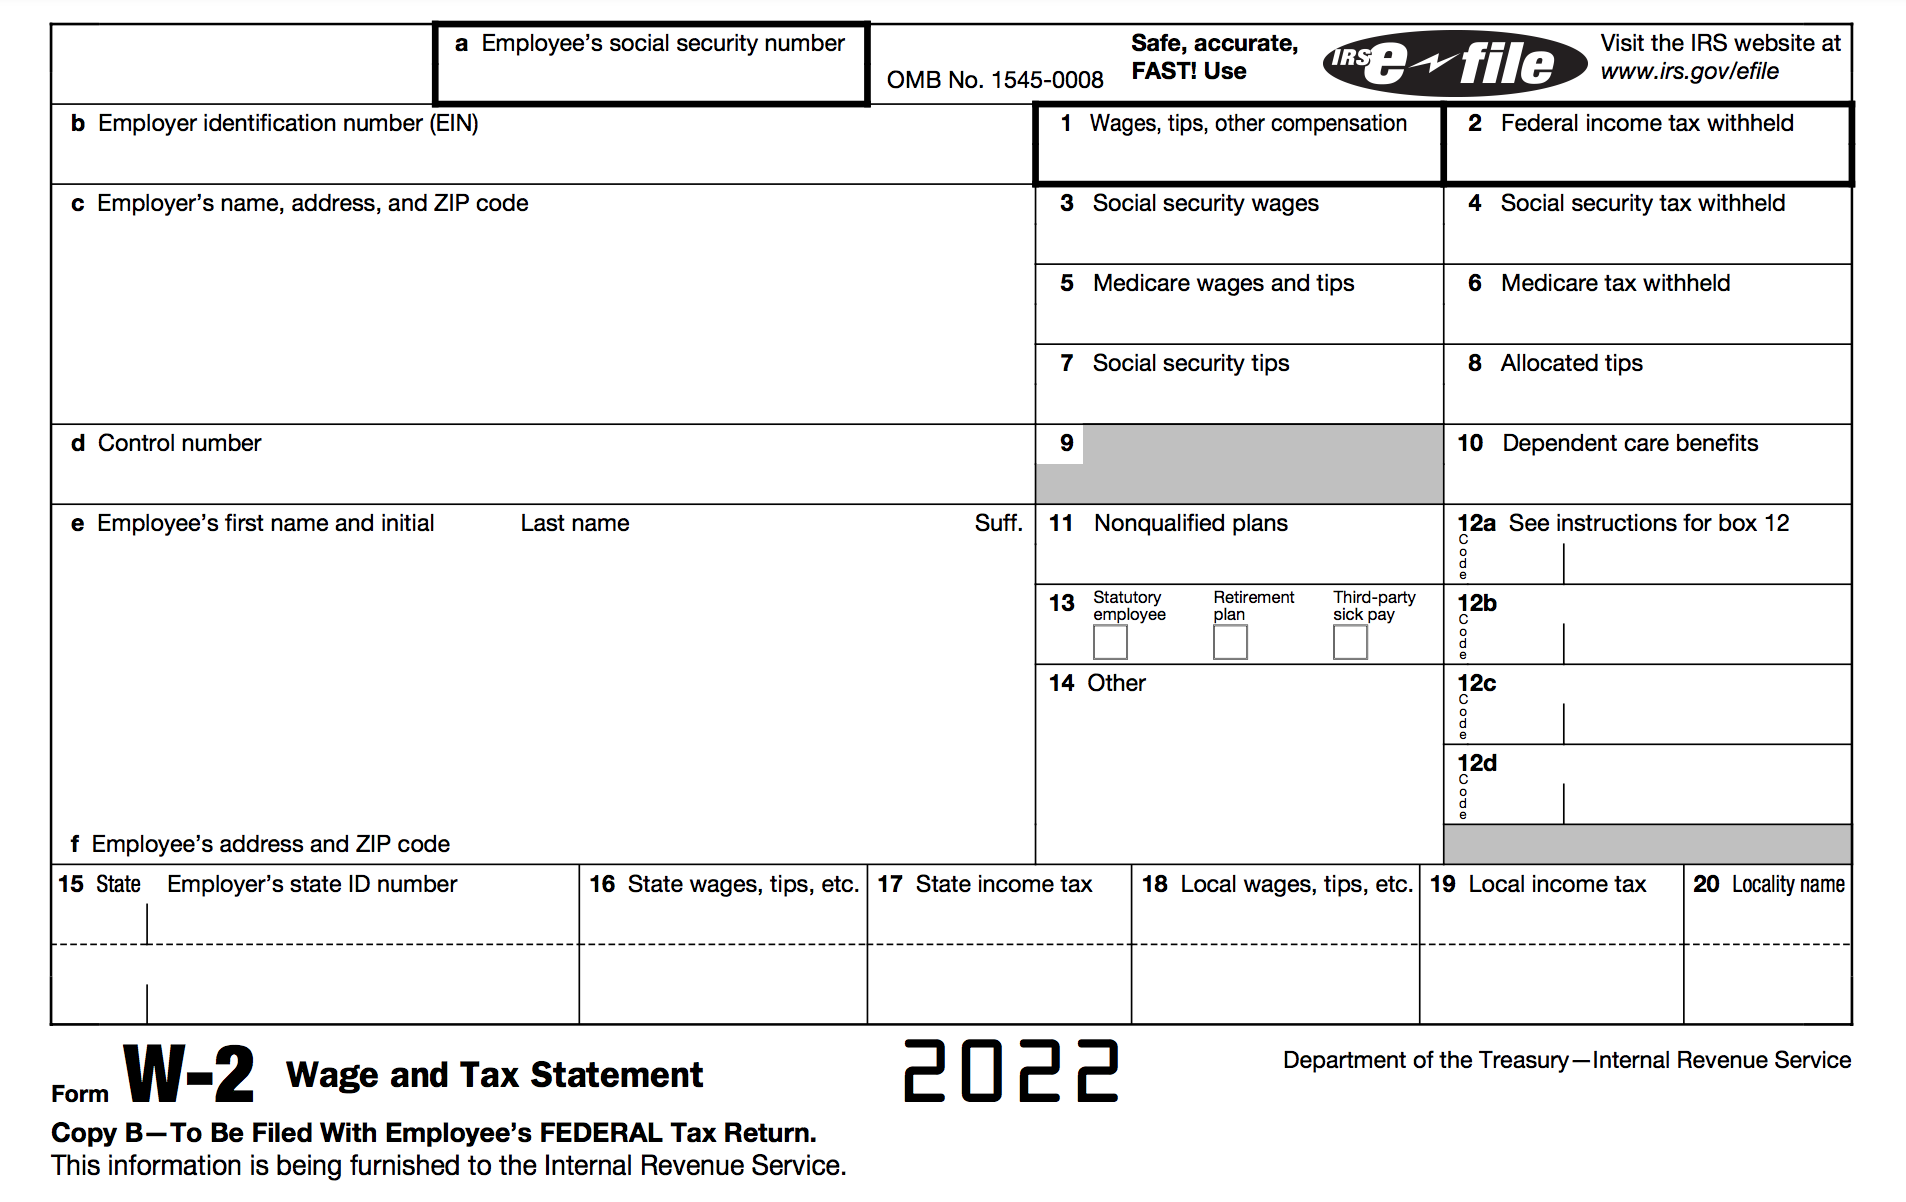 How To Fill Out A W-2 Tax Form | Smartasset for When Does 7 11 Send Out W2 Forms